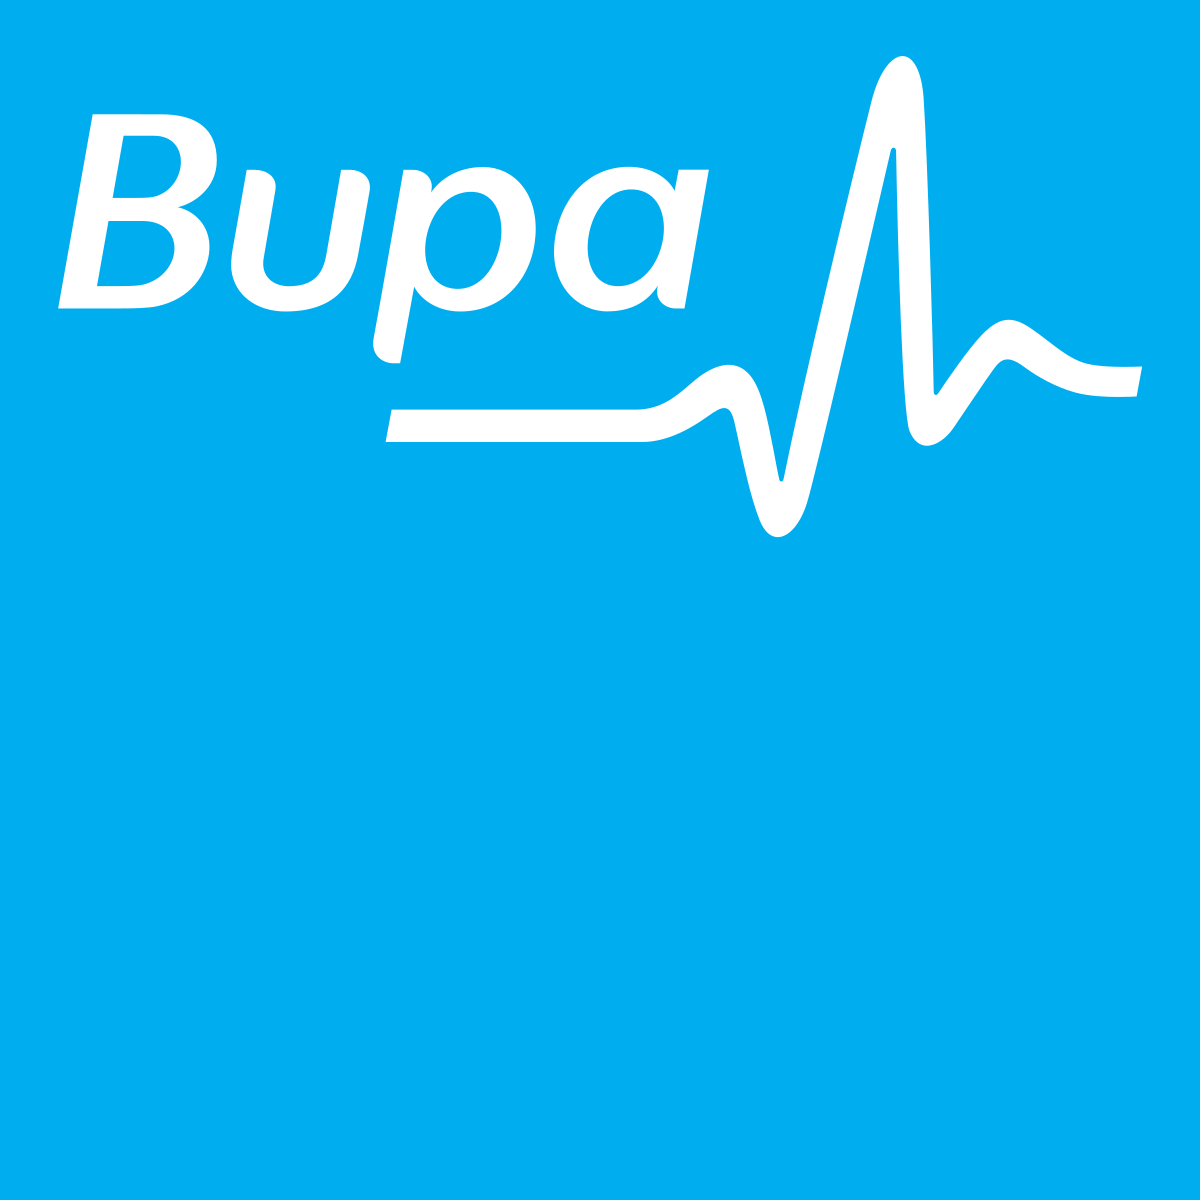 Bupa logo showing practice accepts Bupa registered patients